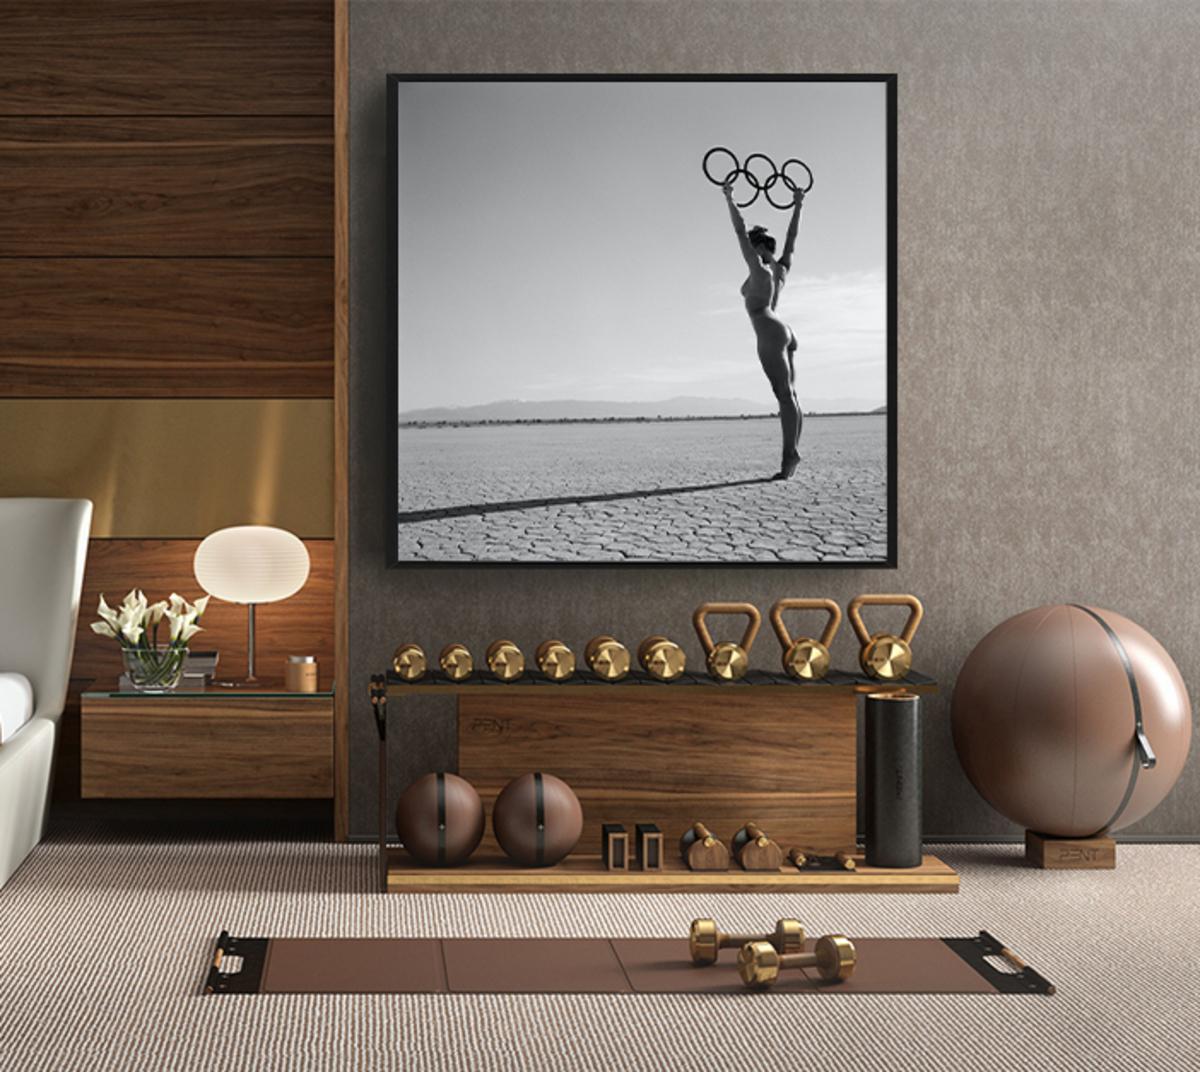 Olympic Games - nude model in desert holding the olympic rings up - Photograph by Guido Argentini